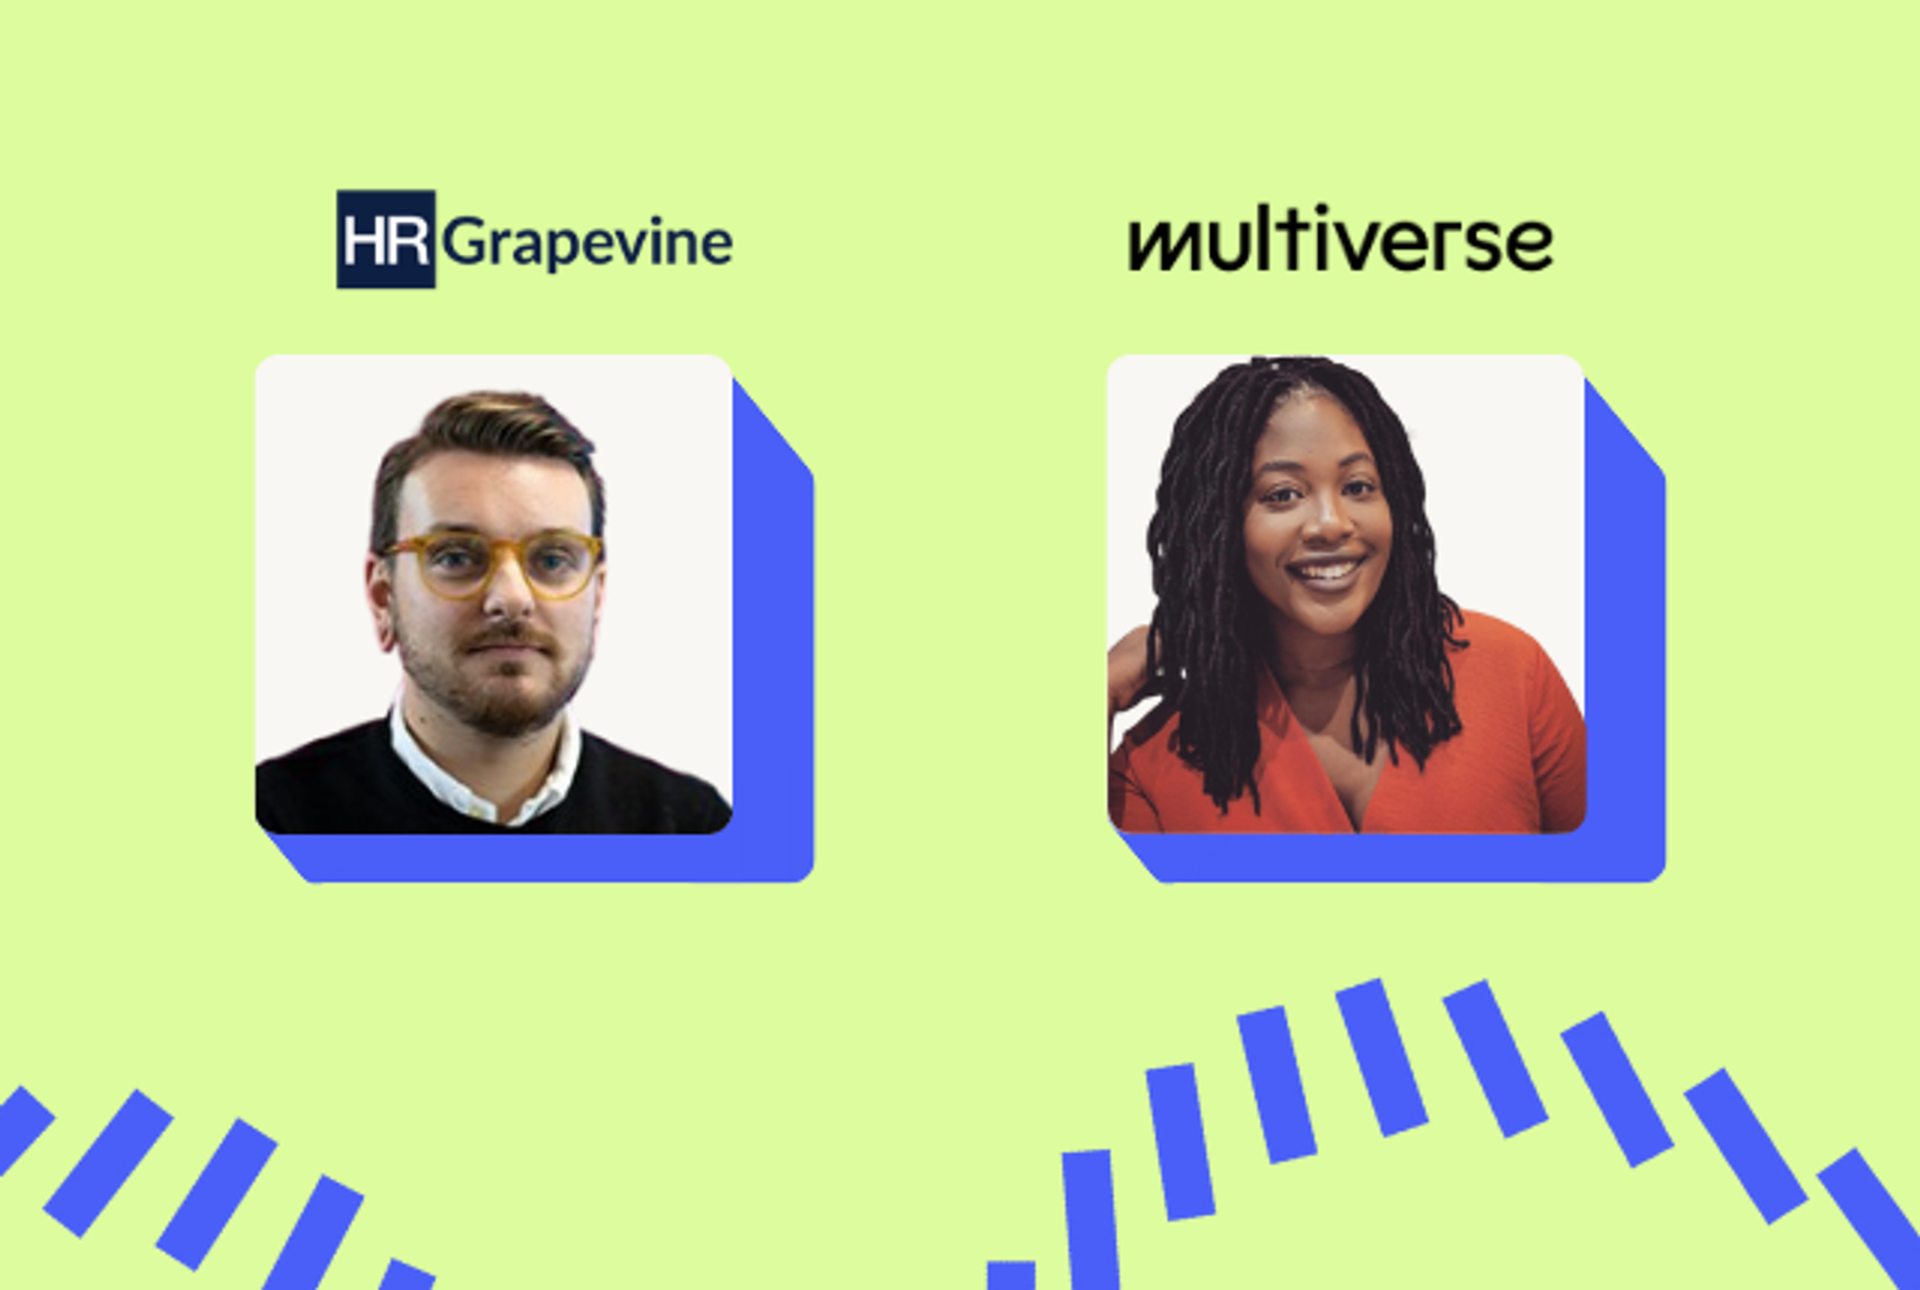 Fireside chat with Grapevine and Multiverse